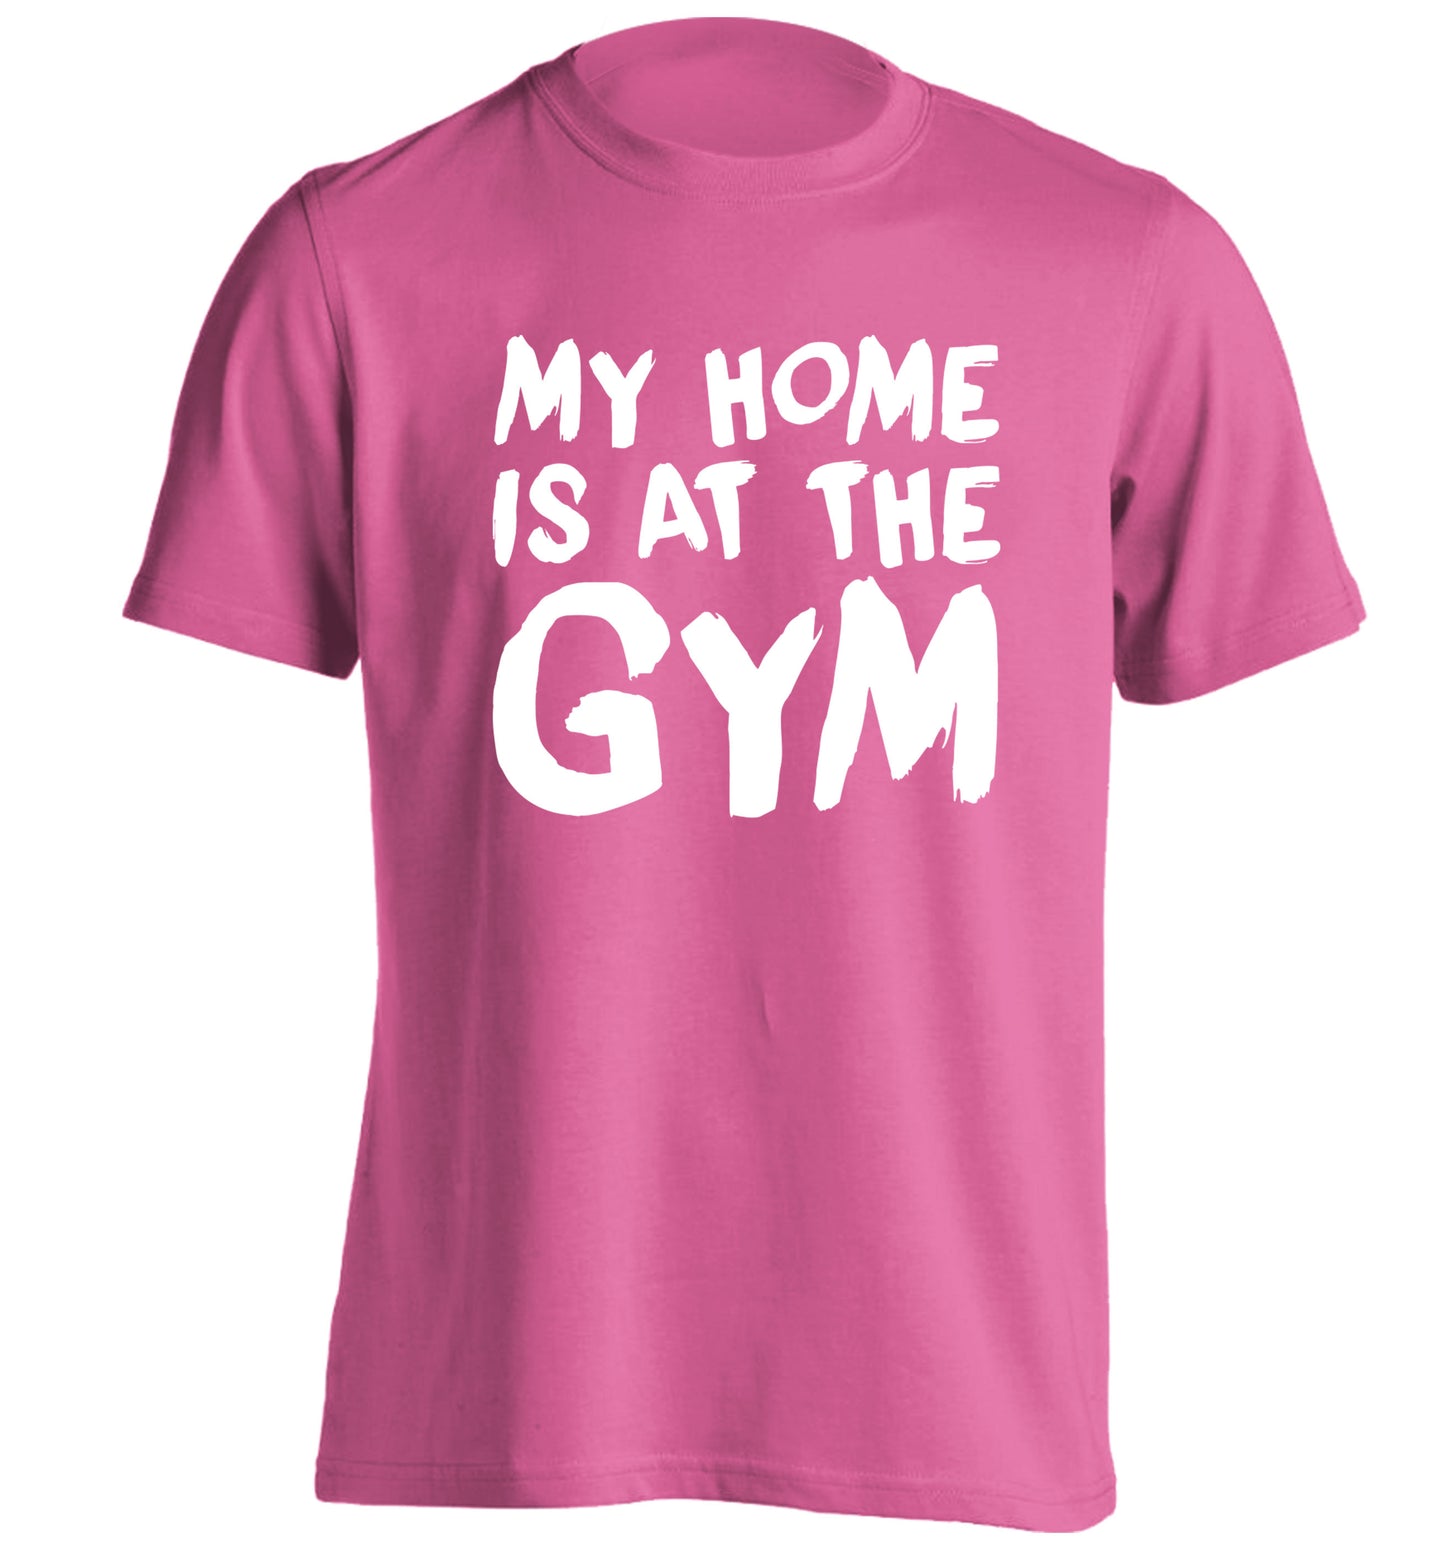 My home is at the gym adults unisex pink Tshirt 2XL